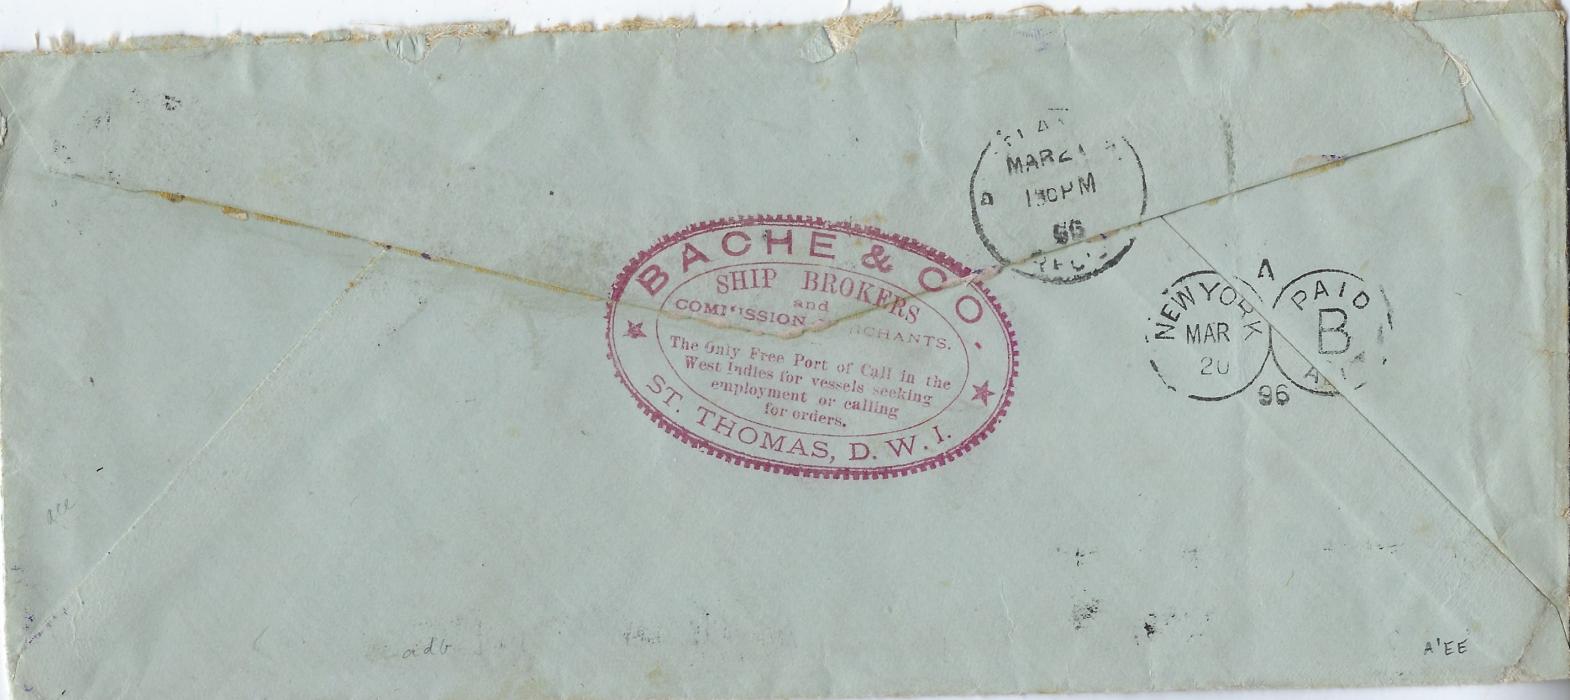 Danish West Indies 1896 long envelope from ‘United States Consulate at St Thomas’ to Portland, ME, franked pair and strip of four ‘10/ CENTS/ 1895’ on 50c. cancelled by St Thomas cds, reverse with New York transit and arrival cds, front and back with Ship Brokers handstamp; some faults at top of envelope, a fine multiple, scarce franking.